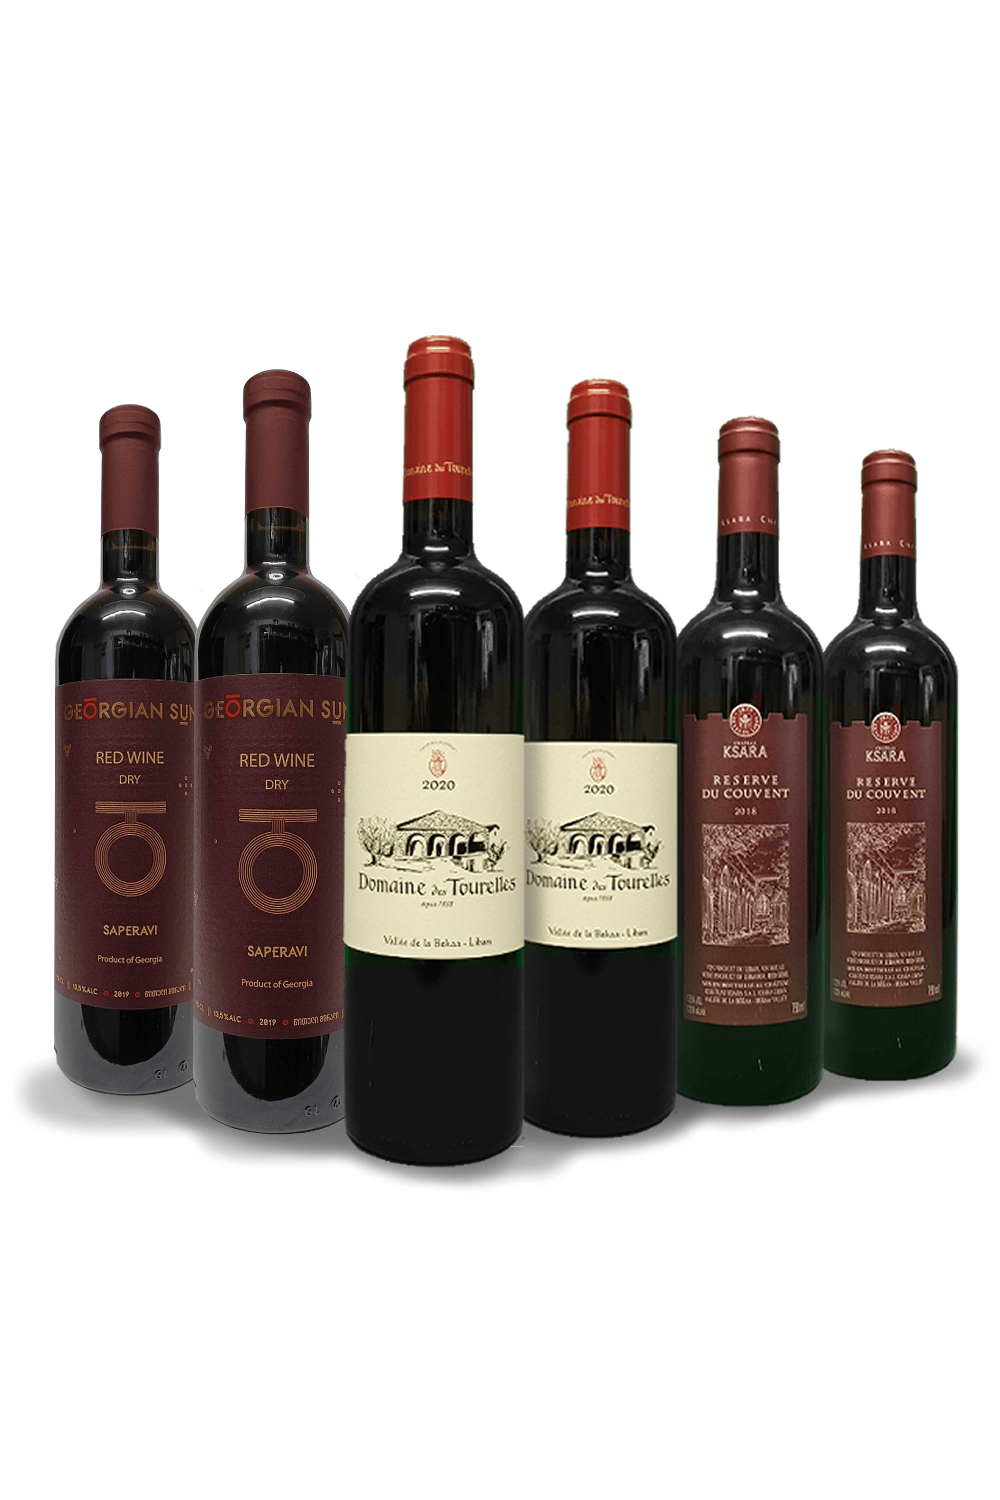 Novel Wines Mixed Case Our deal on Eastern Med Reds - Six Bottle Mixed Case Offer